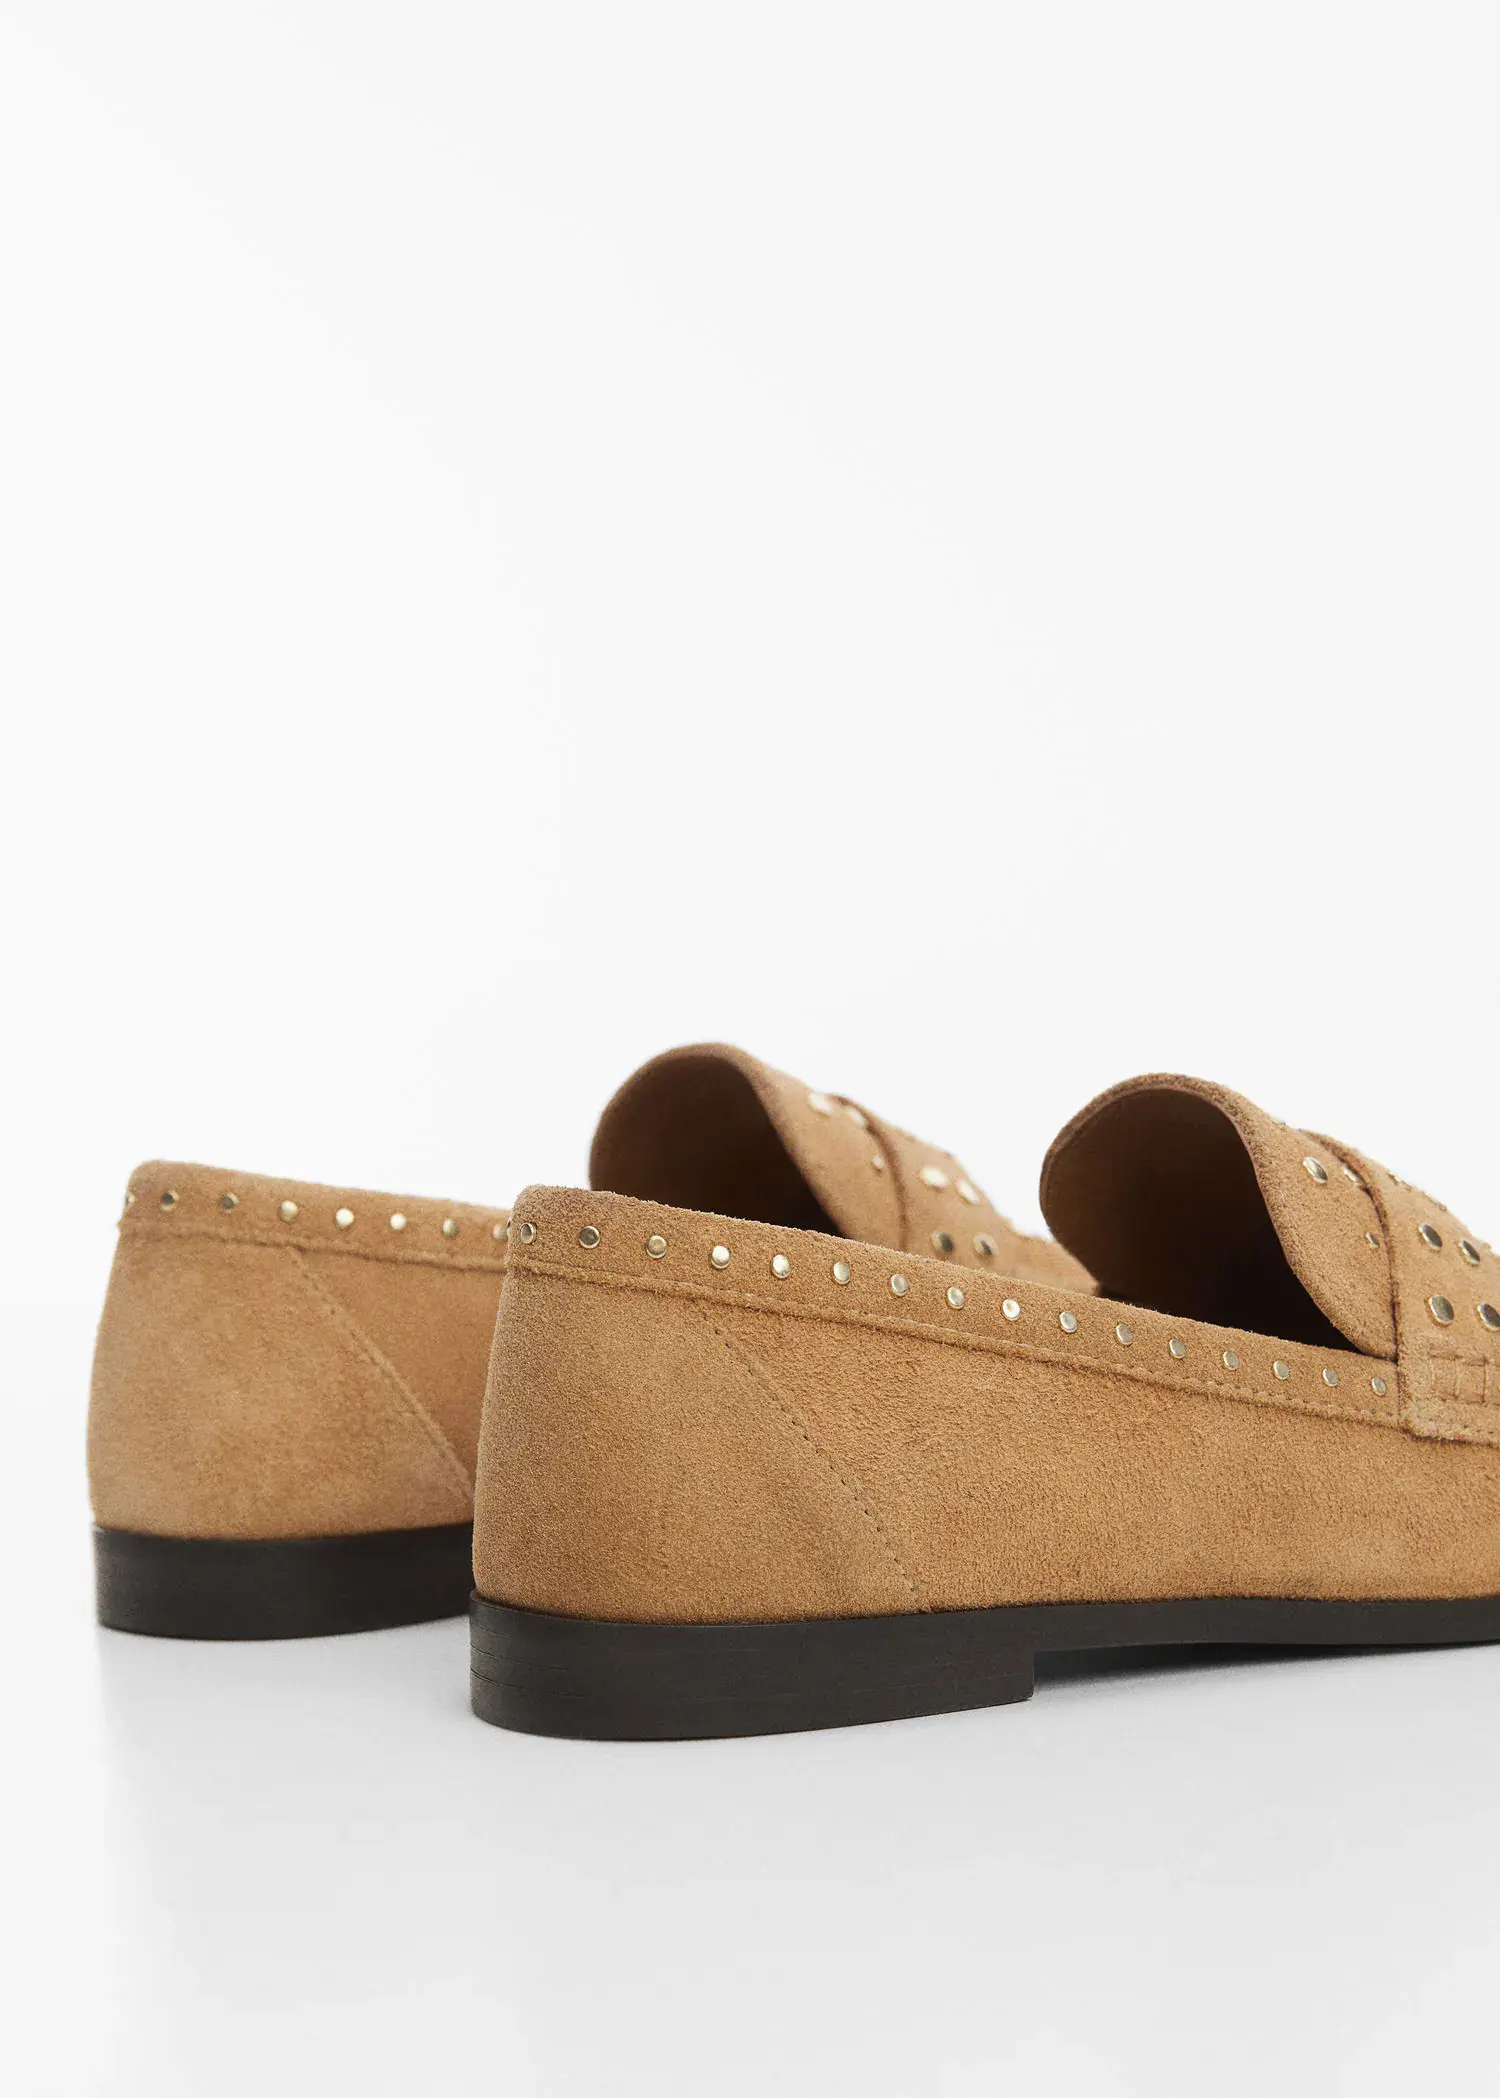 Mango Studded leather loafers. 2